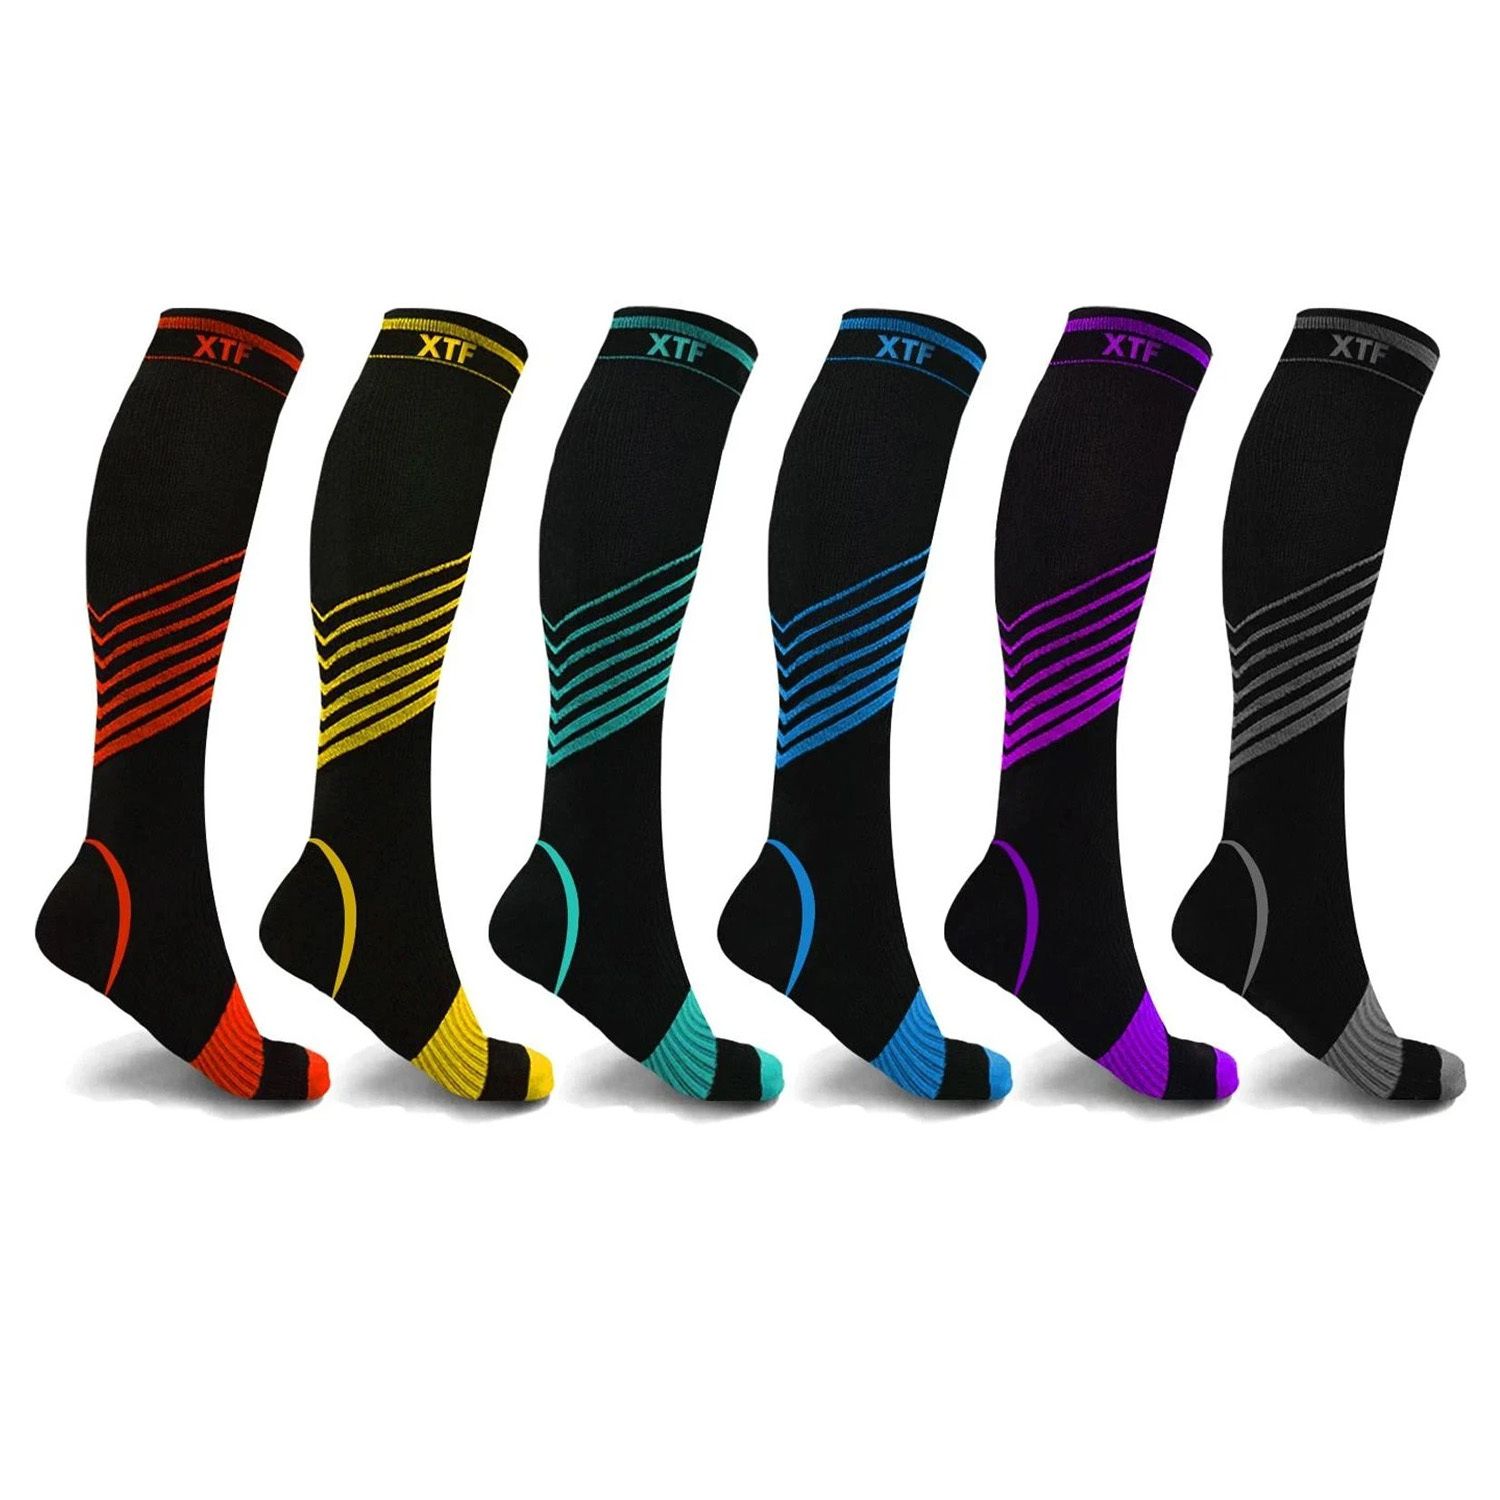 2 Pair Solid Cotton Blend Graduated Compression Socks